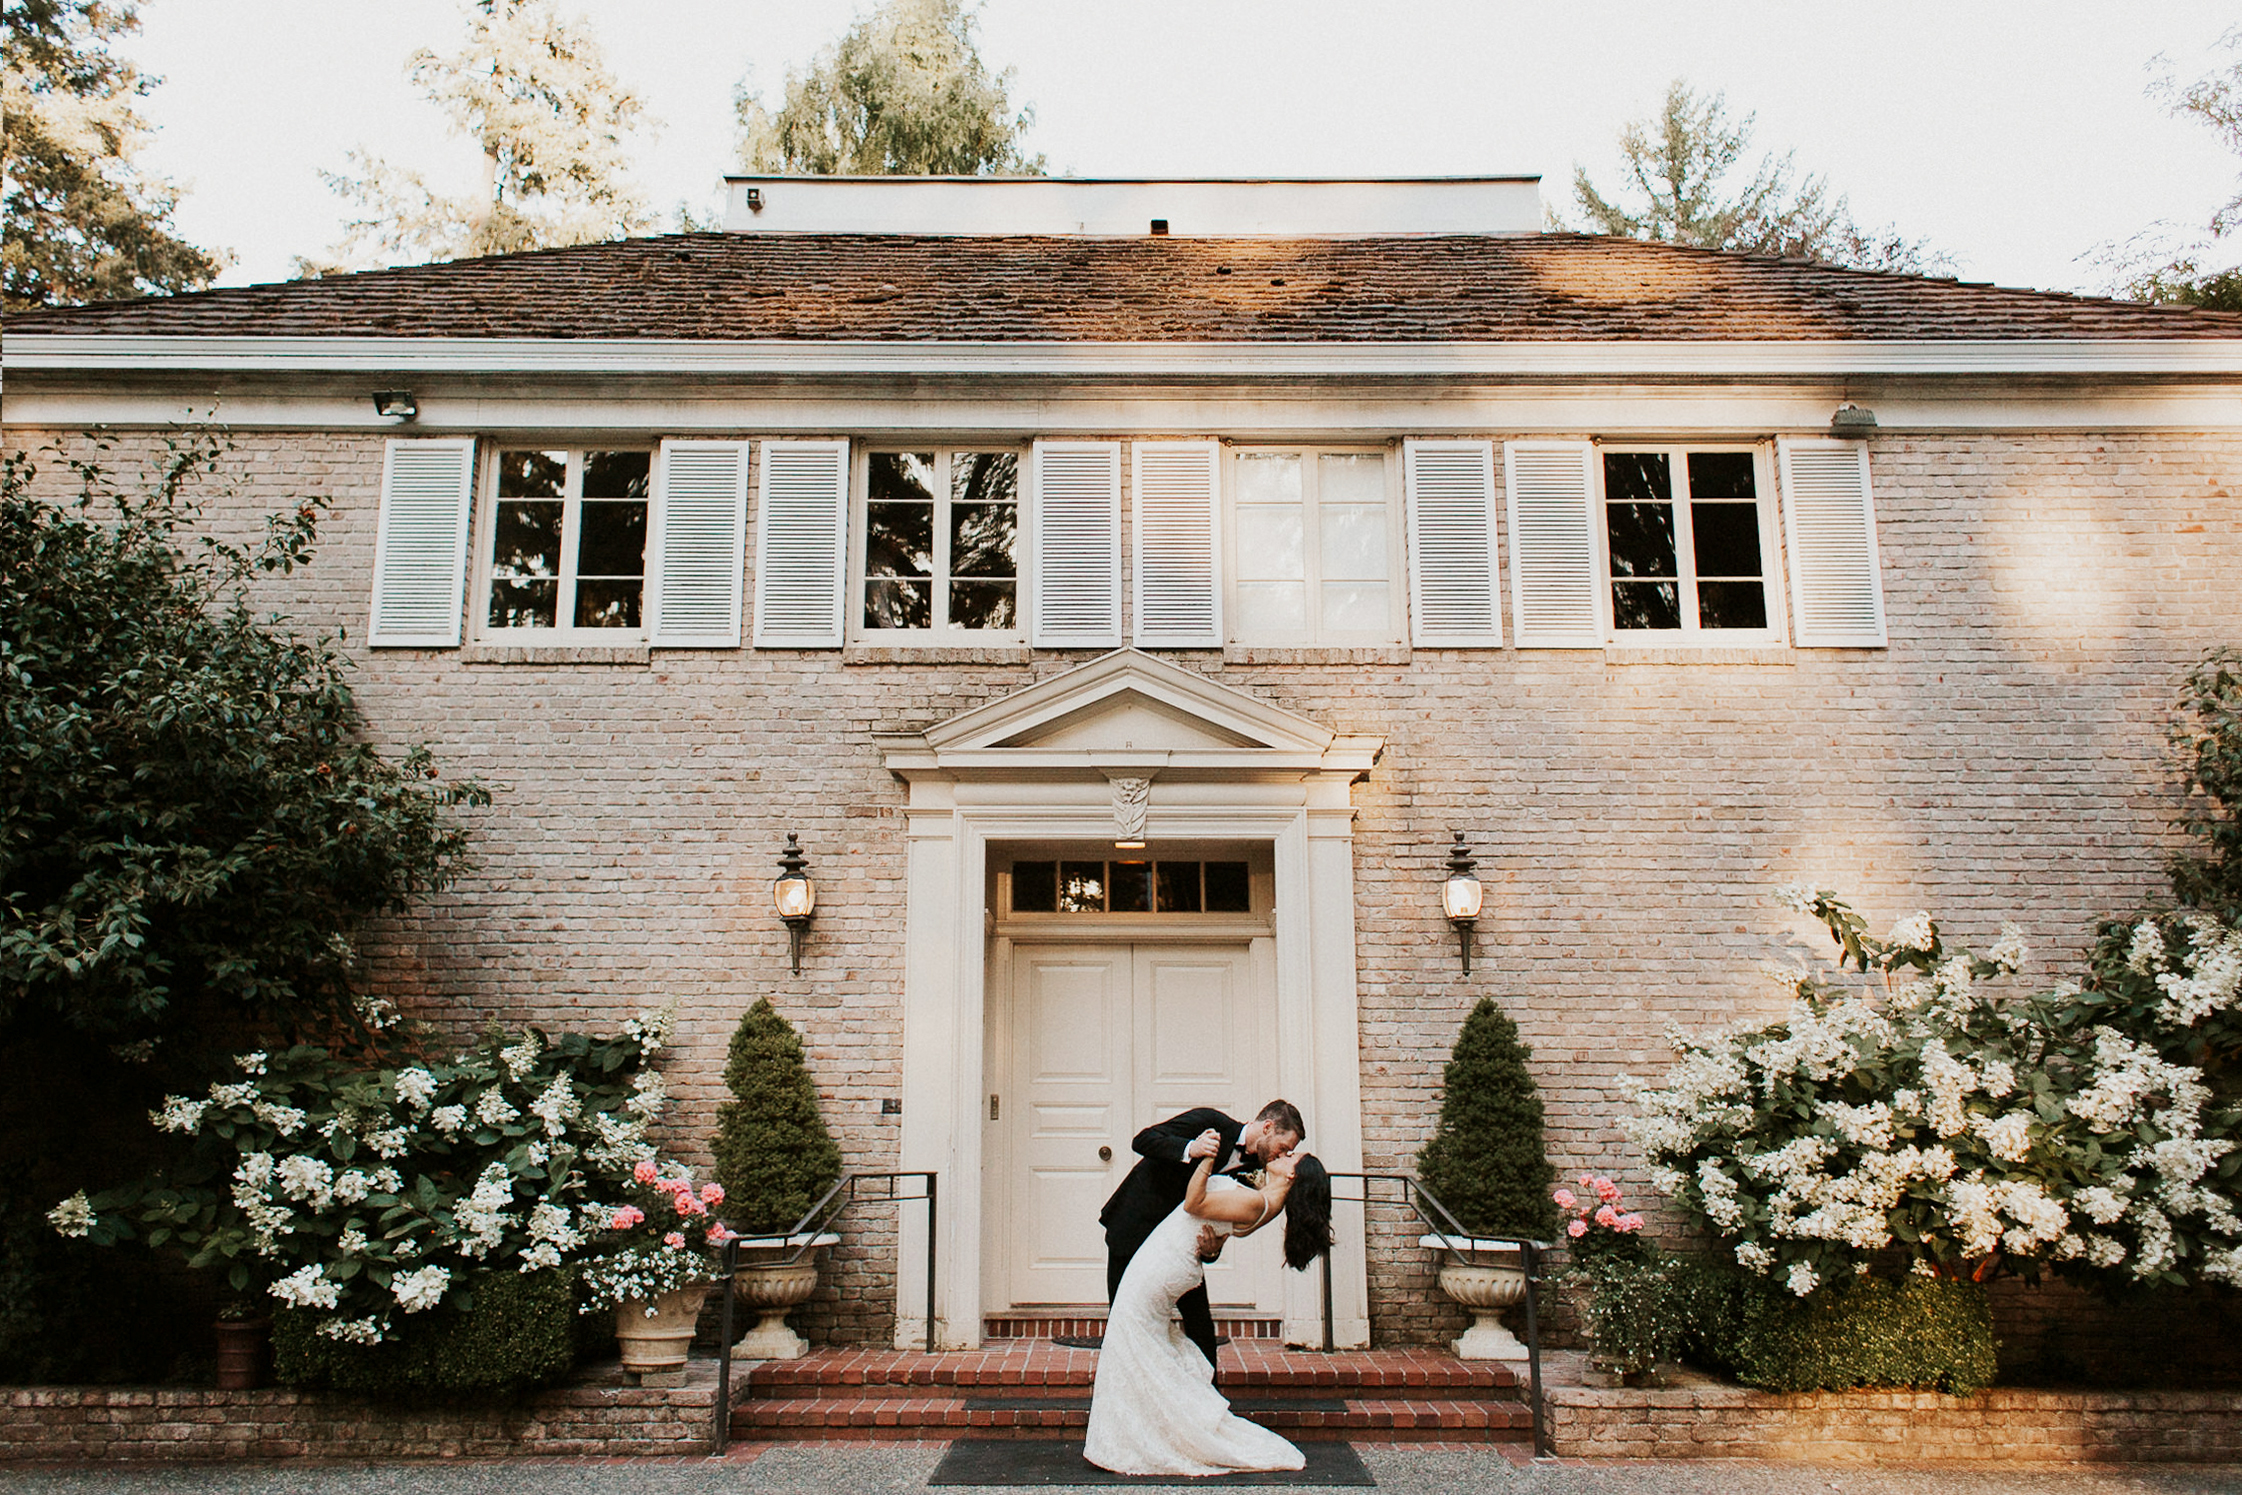 How to pick the perfect wedding venue by Sarah Anne Photography